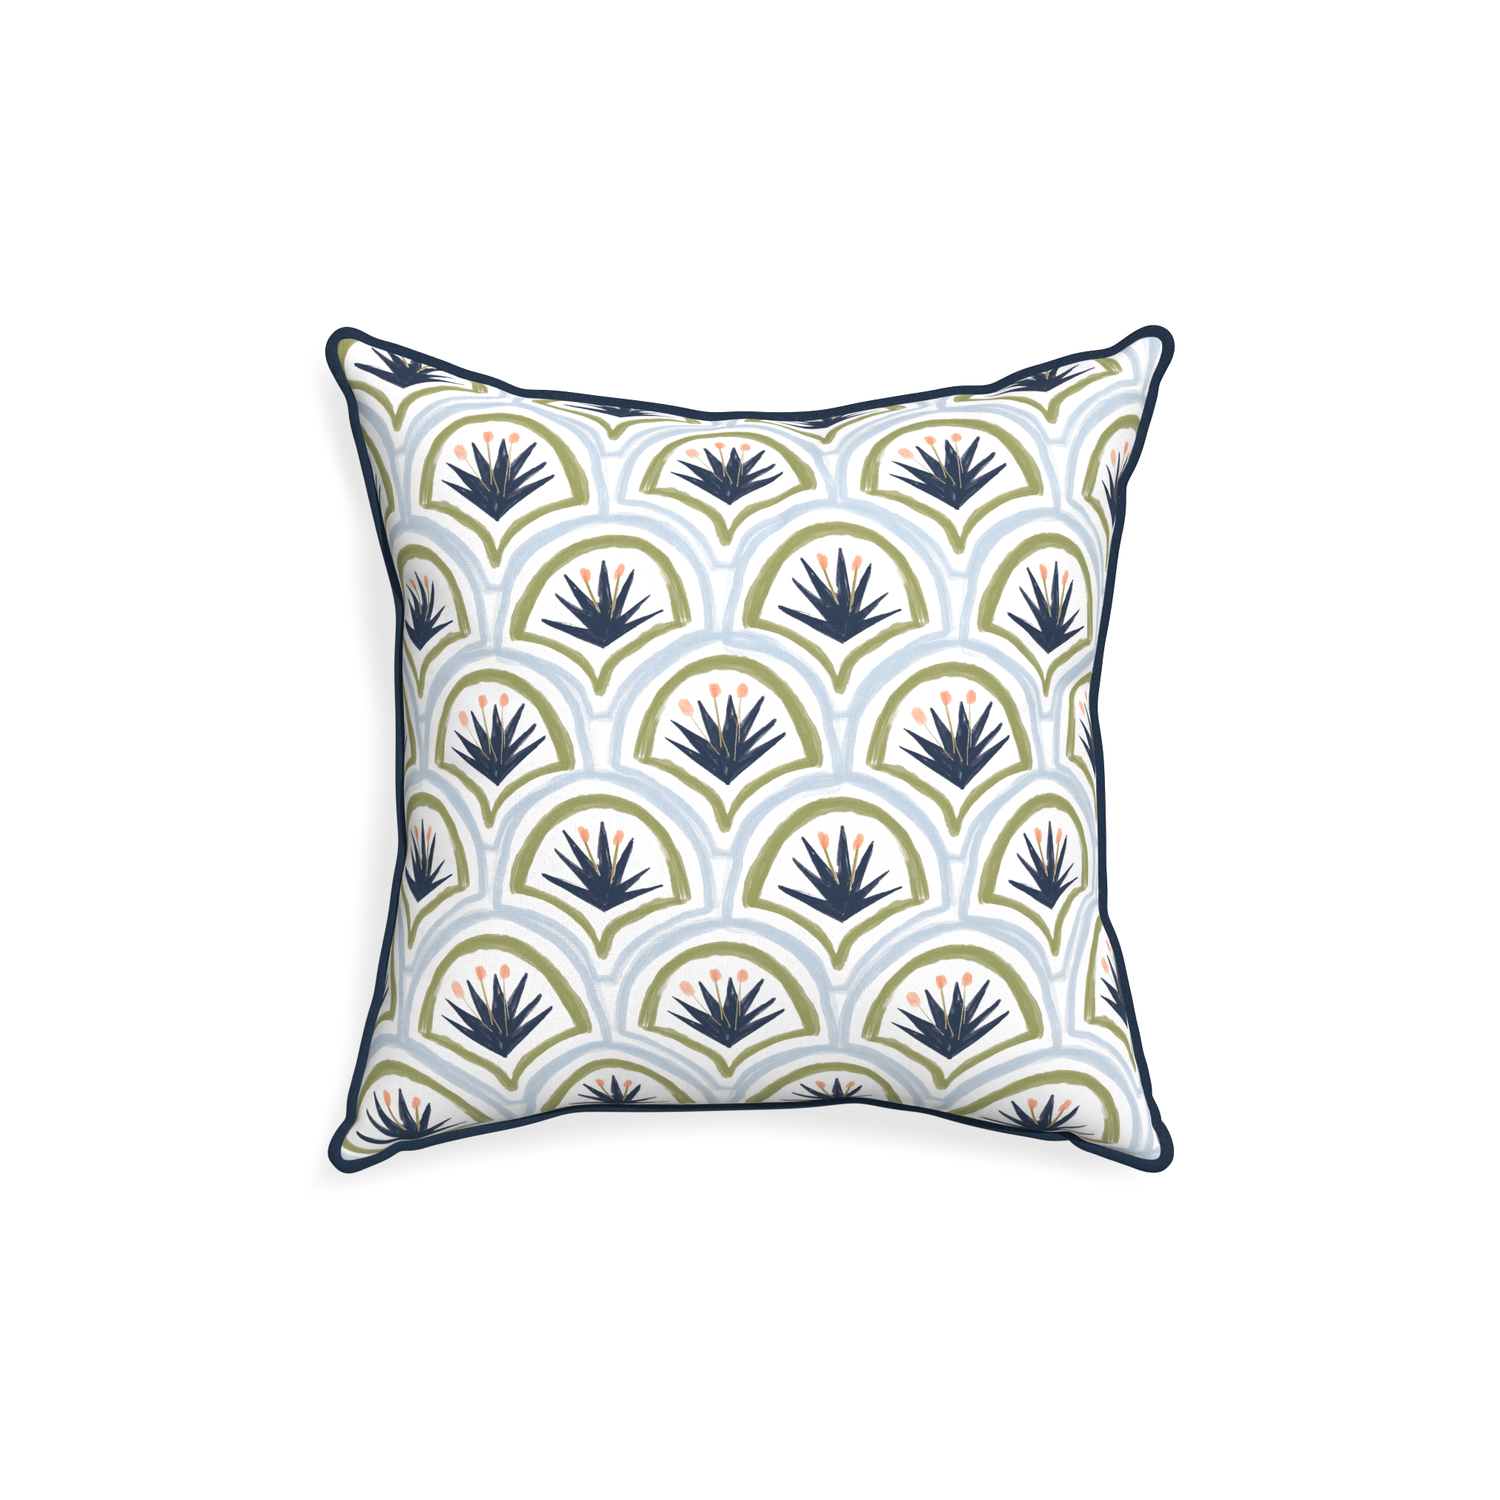 18-square thatcher midnight custom art deco palm patternpillow with c piping on white background